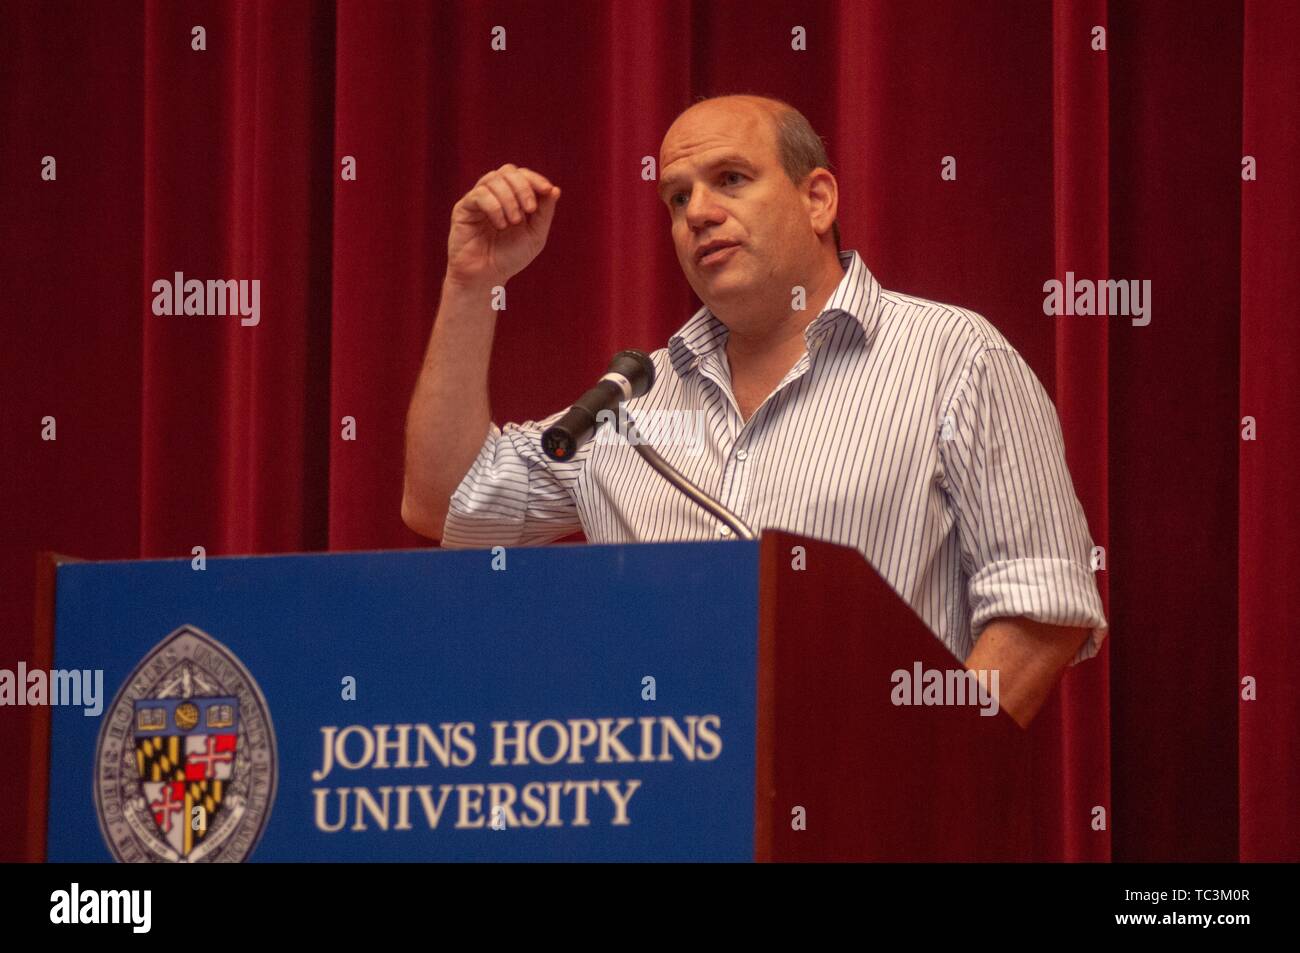 David Simon, a television producer and creator of HBO television show The Wire, speaks at a podium at the Johns Hopkins University, Baltimore, Maryland, September 26, 2007. From the Homewood Photography Collection. () Stock Photo